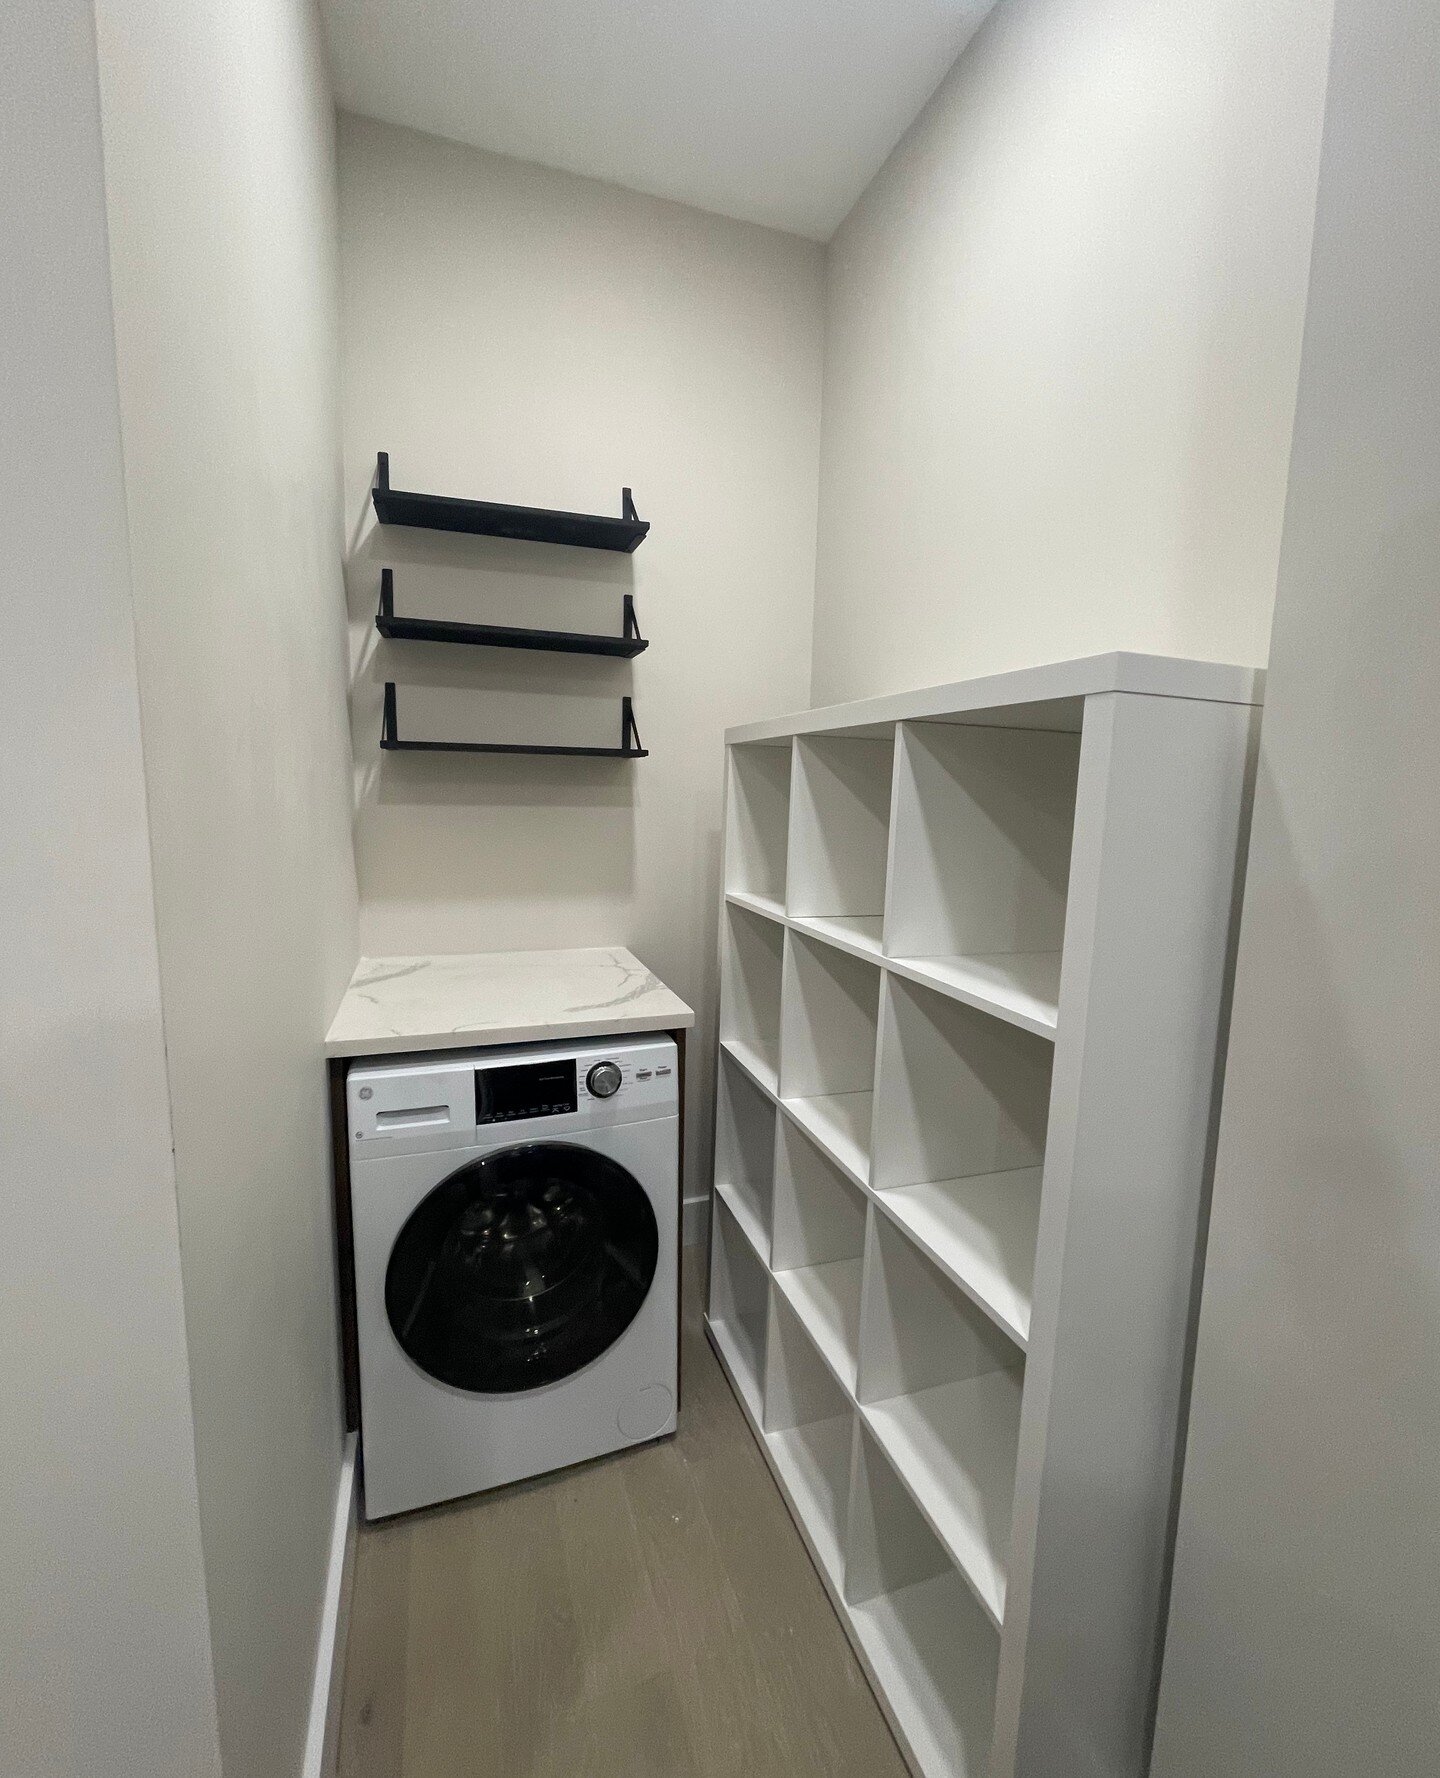 In Manhattan, every inch counts. Taking an unused shaftway and turning it into a storage area with built in shelving as well as a combo washer dryer.